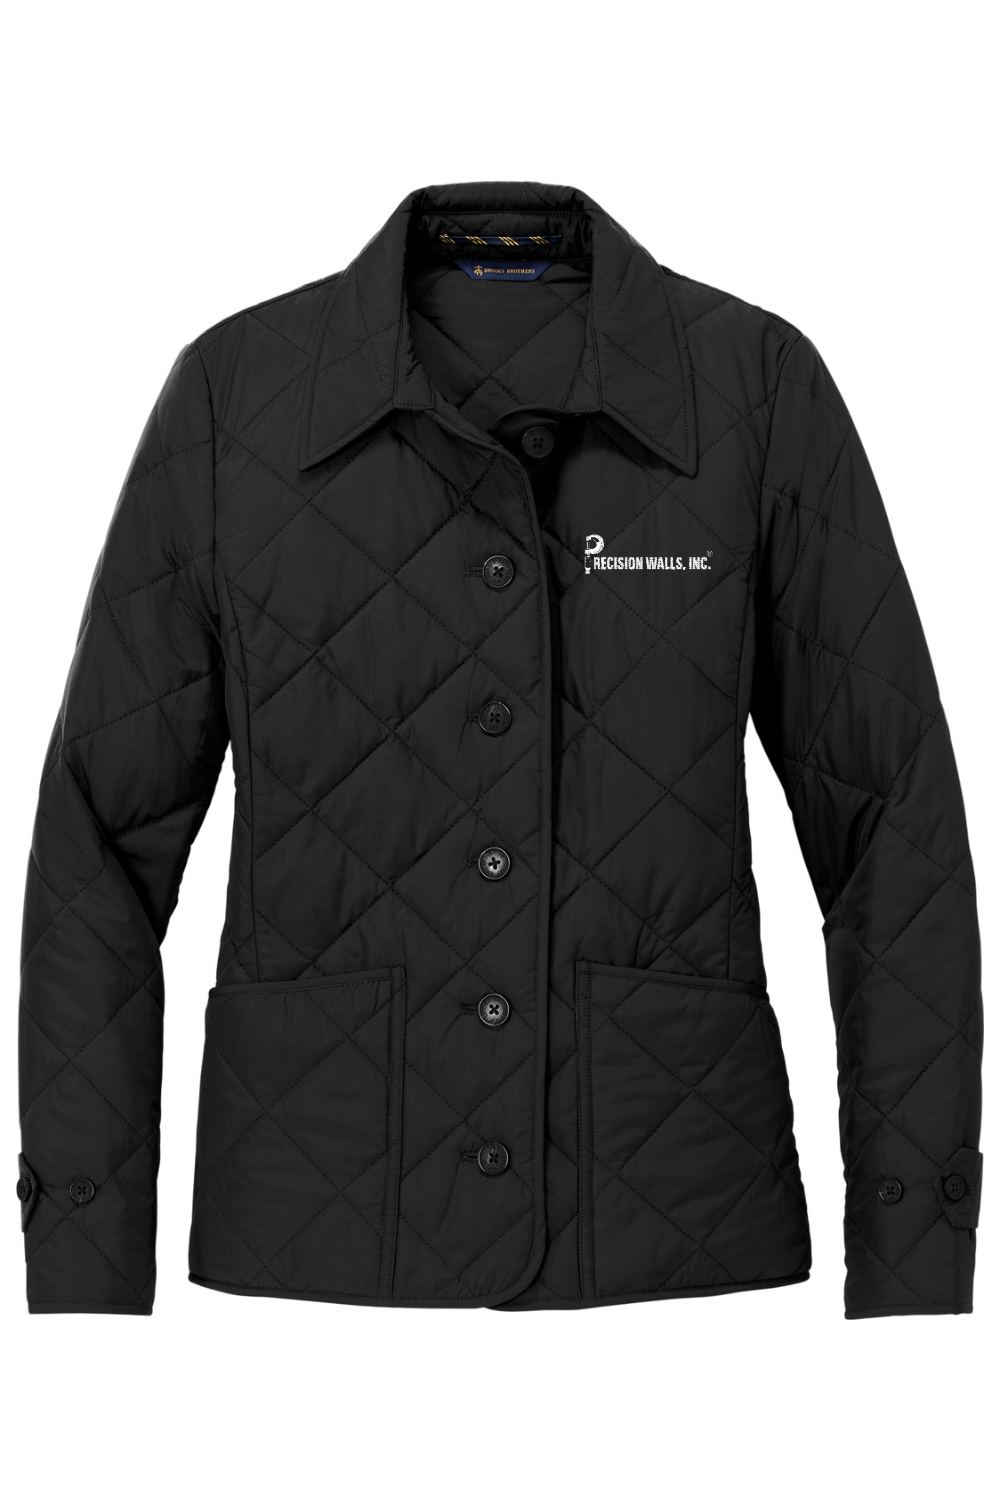 Women's Quilted Jacket – Precision Walls